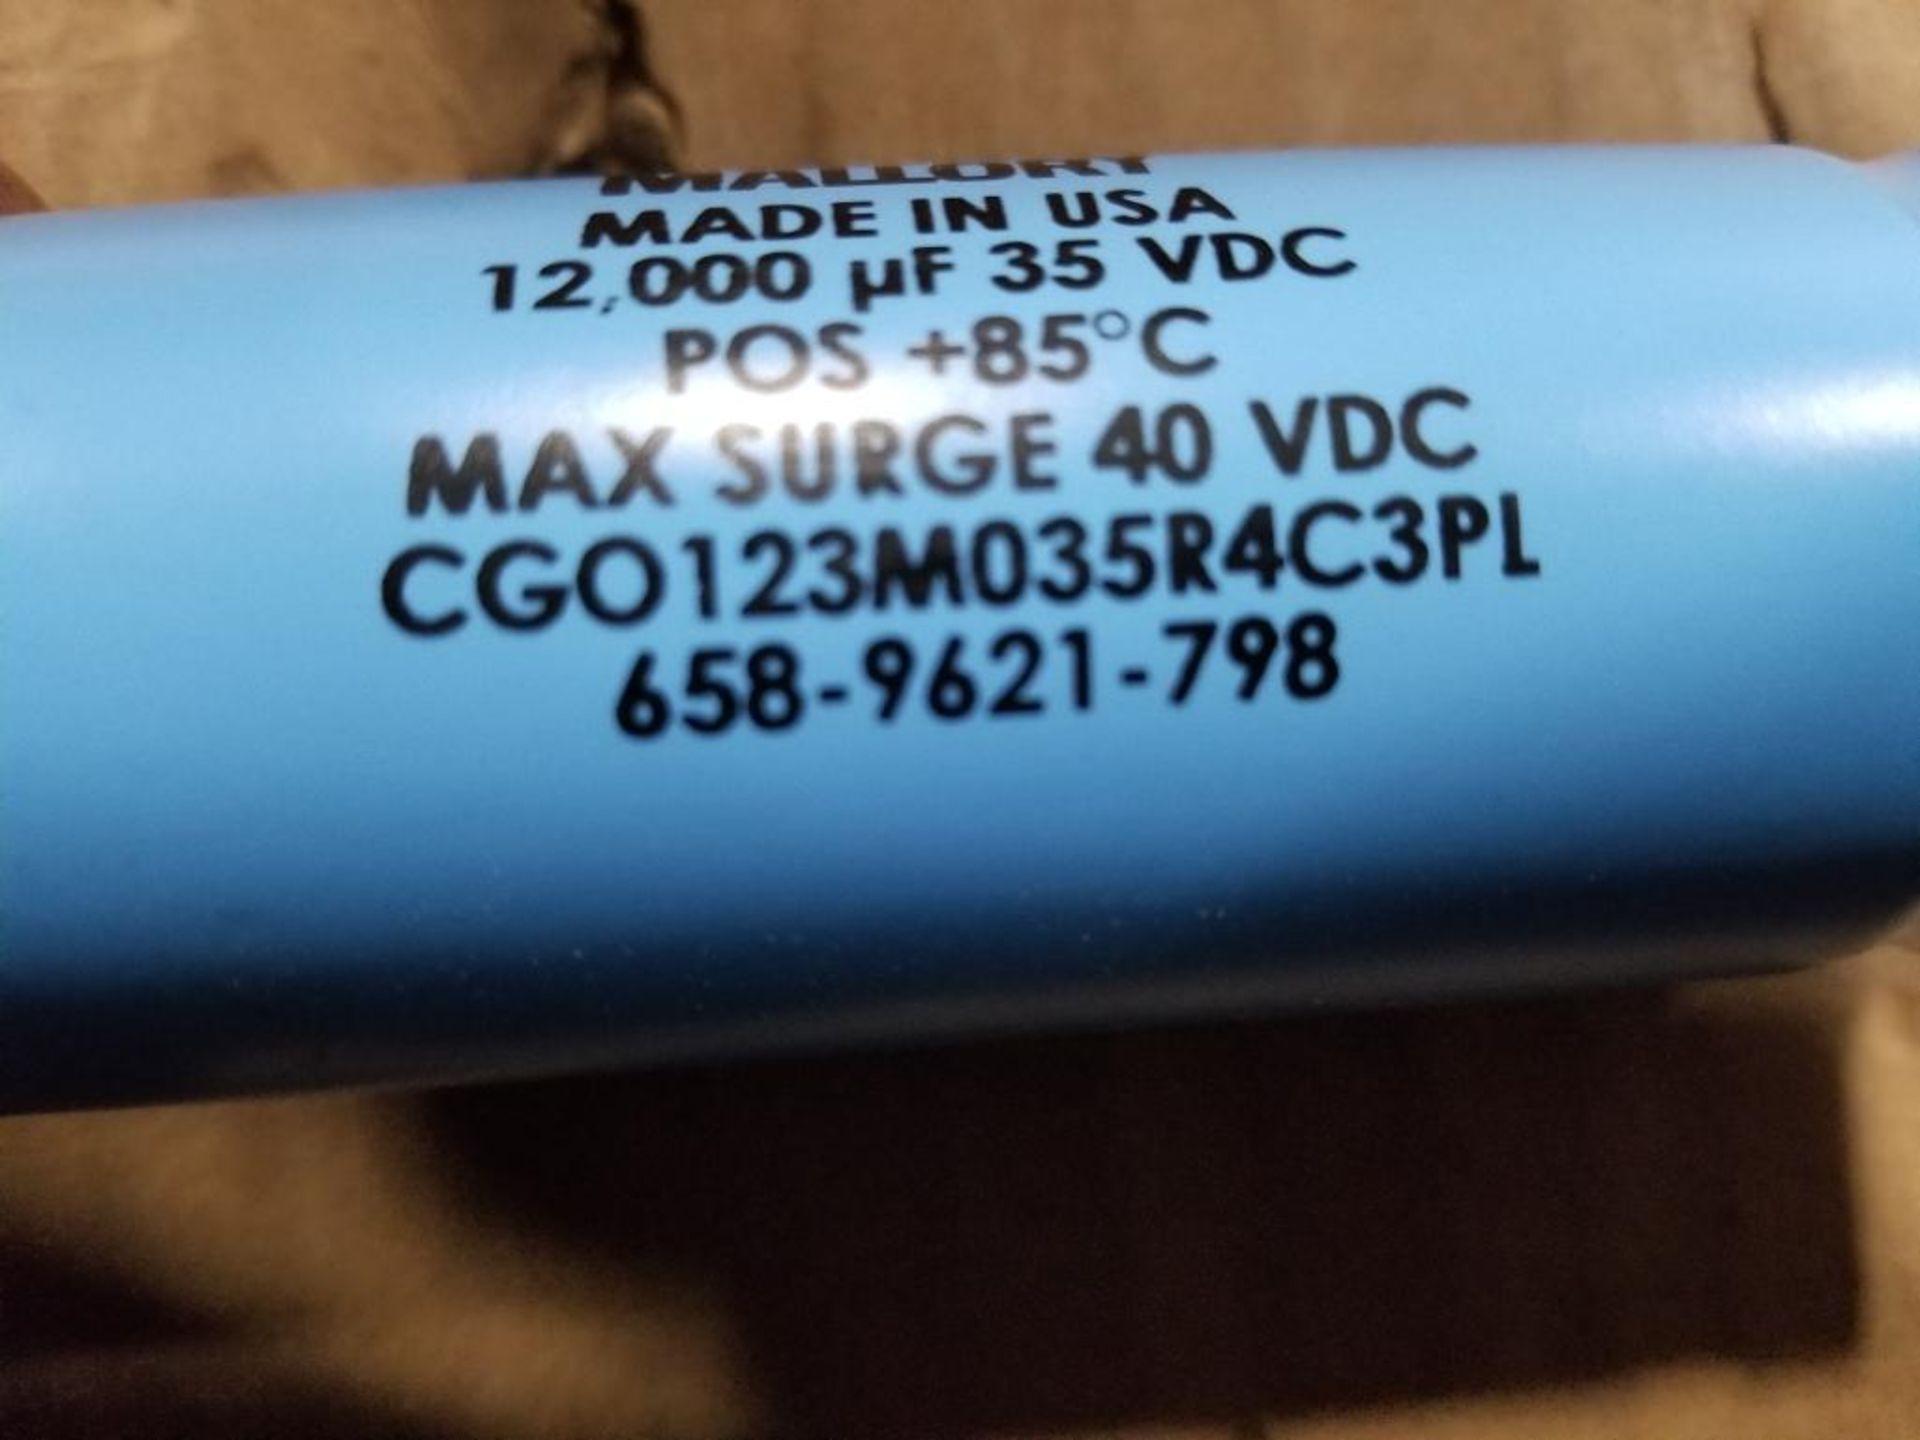 Qty 144 - Mallory capacitor. Part number CGO123M035R4C3PL. - Image 5 of 5